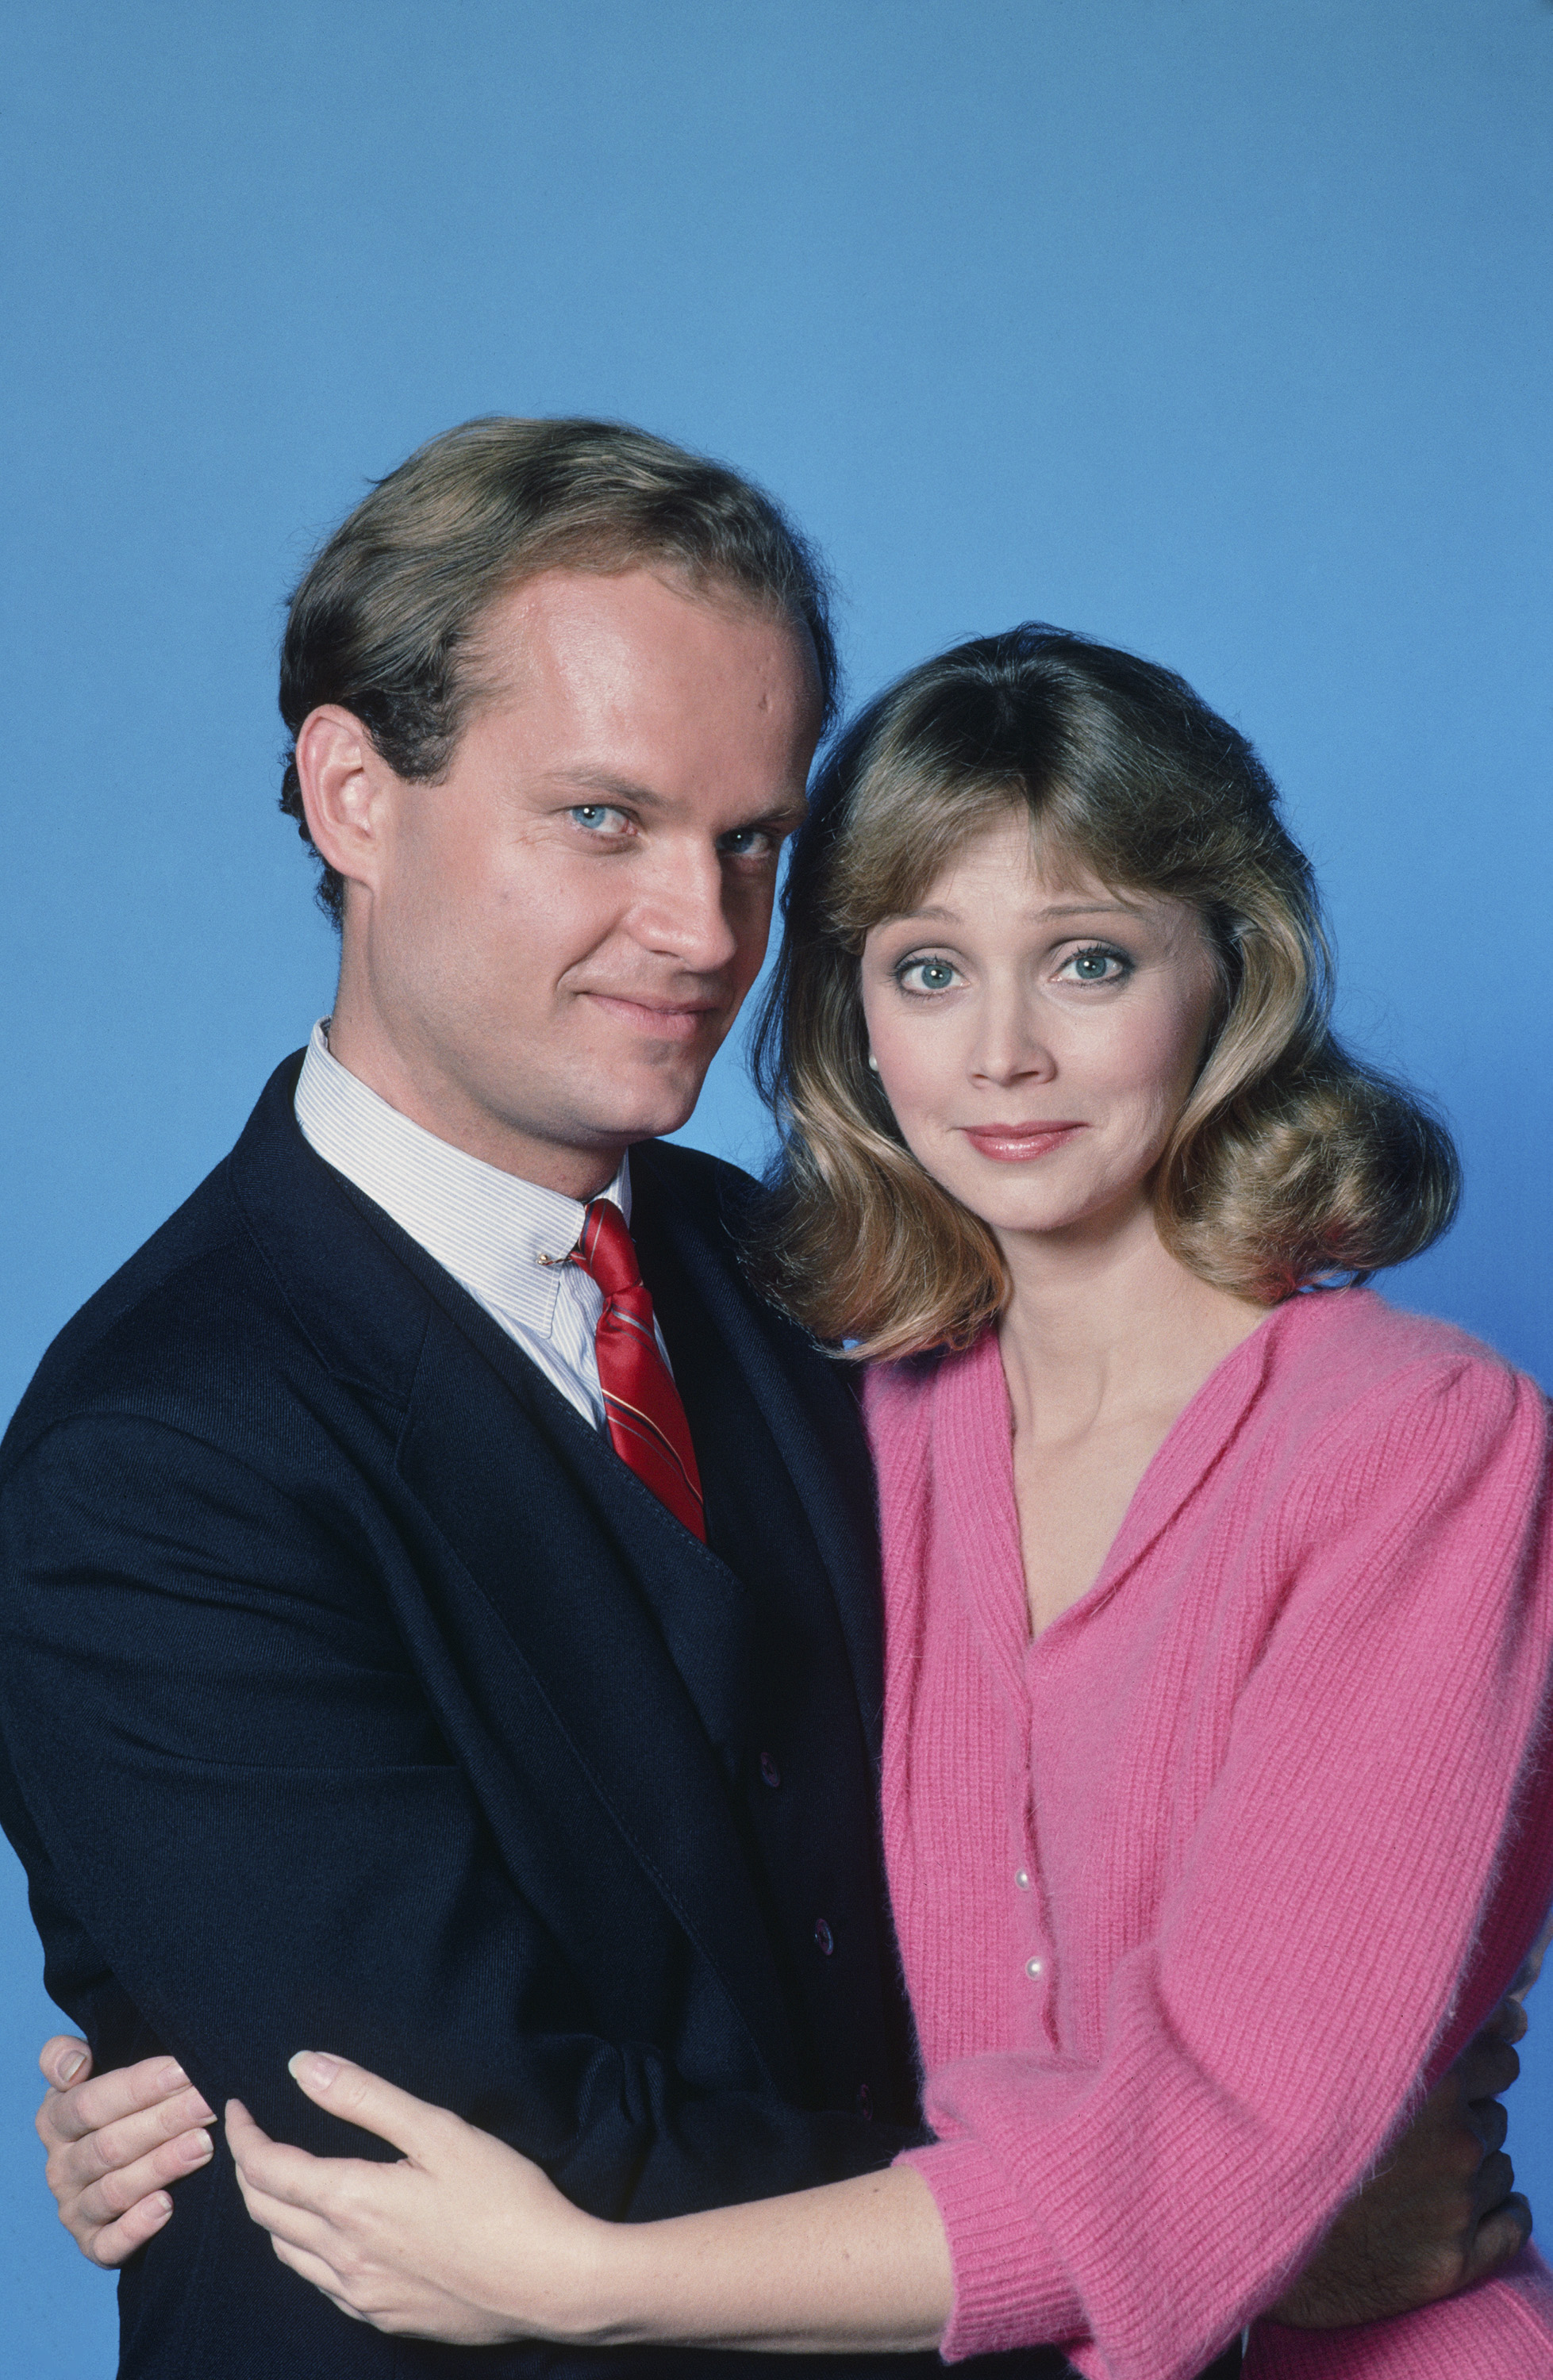 Kelsey Grammer as Dr. Frasier Crane and Shelley Long as Diane Chambers in "Cheers" | Source: Getty Images